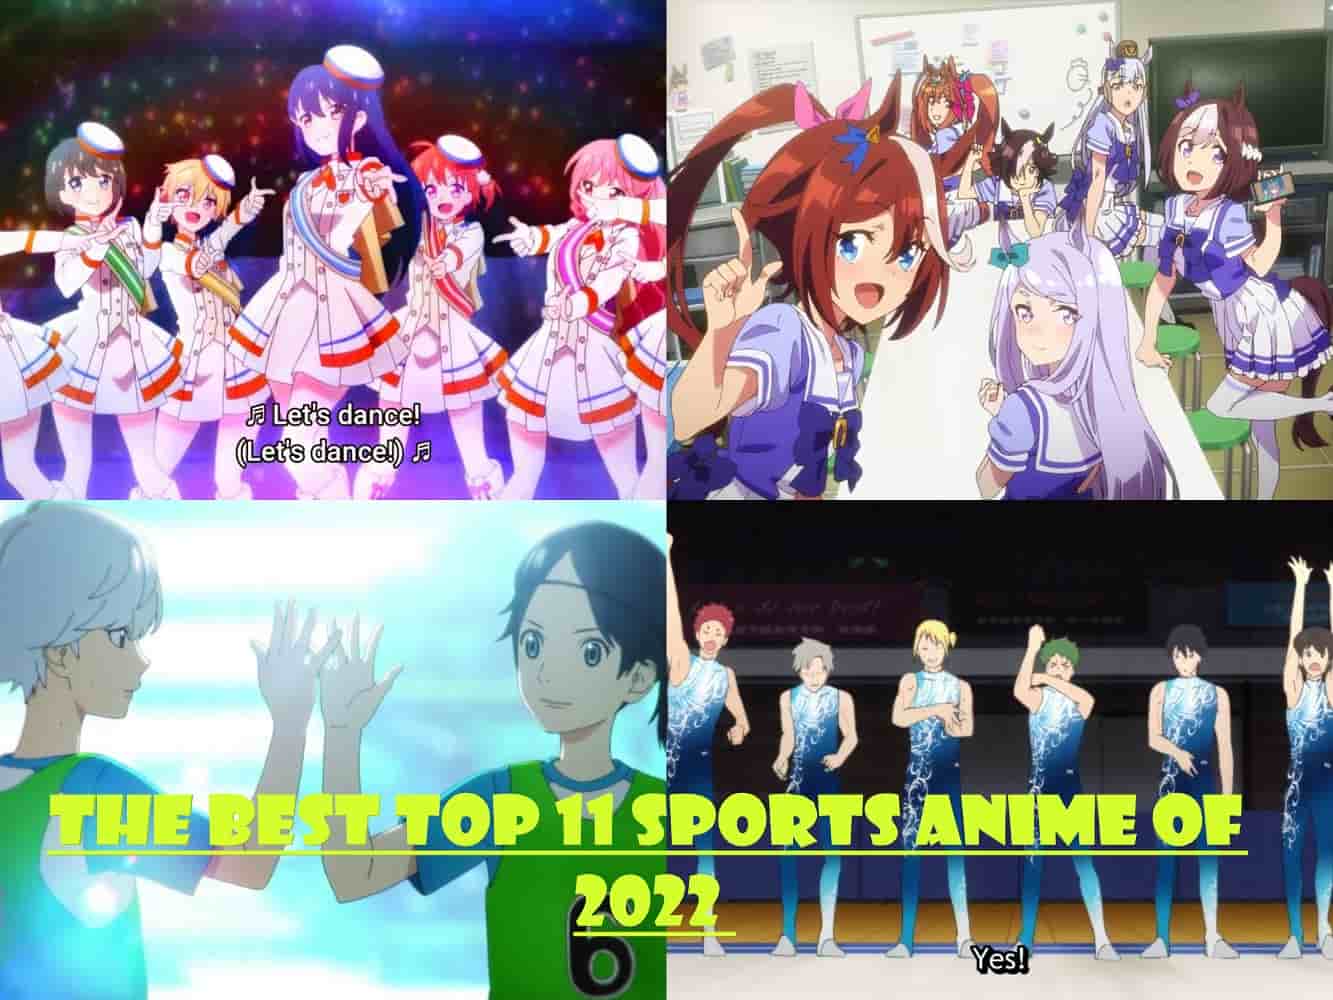 The Best Top 11 Sports Anime Of 2022